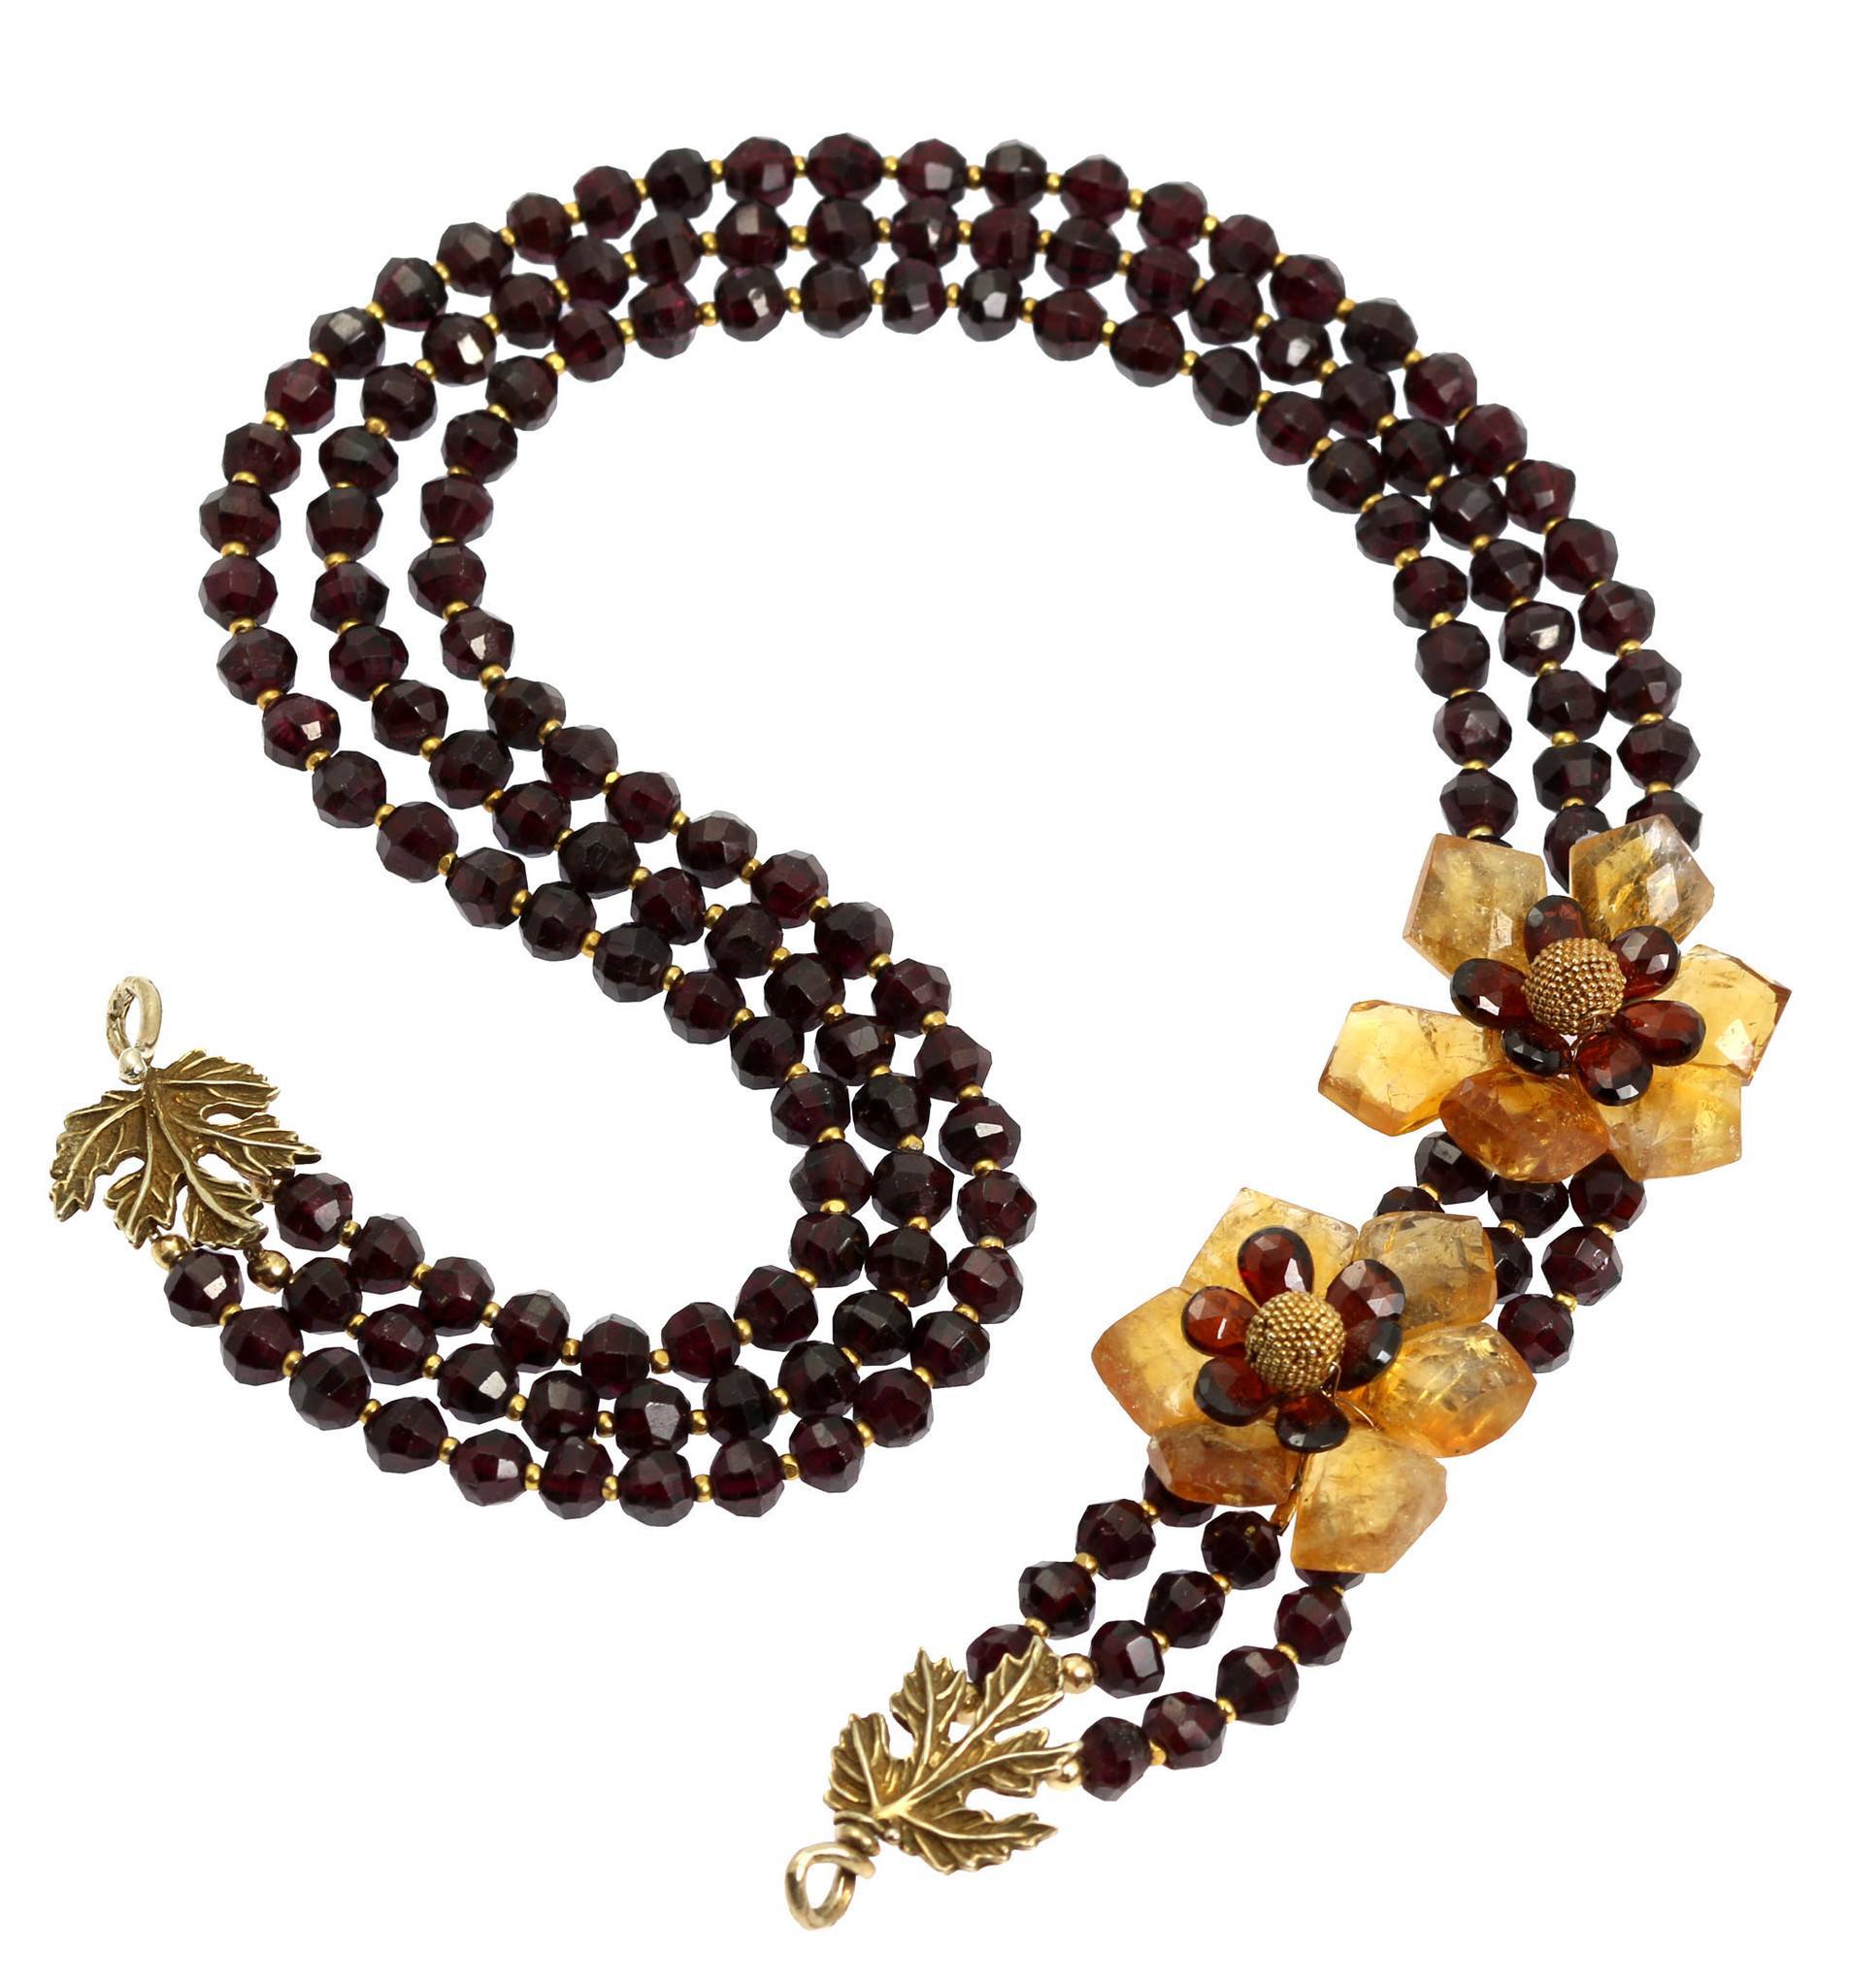 Detail View of Faceted Garnets And Citrine Flower Necklace